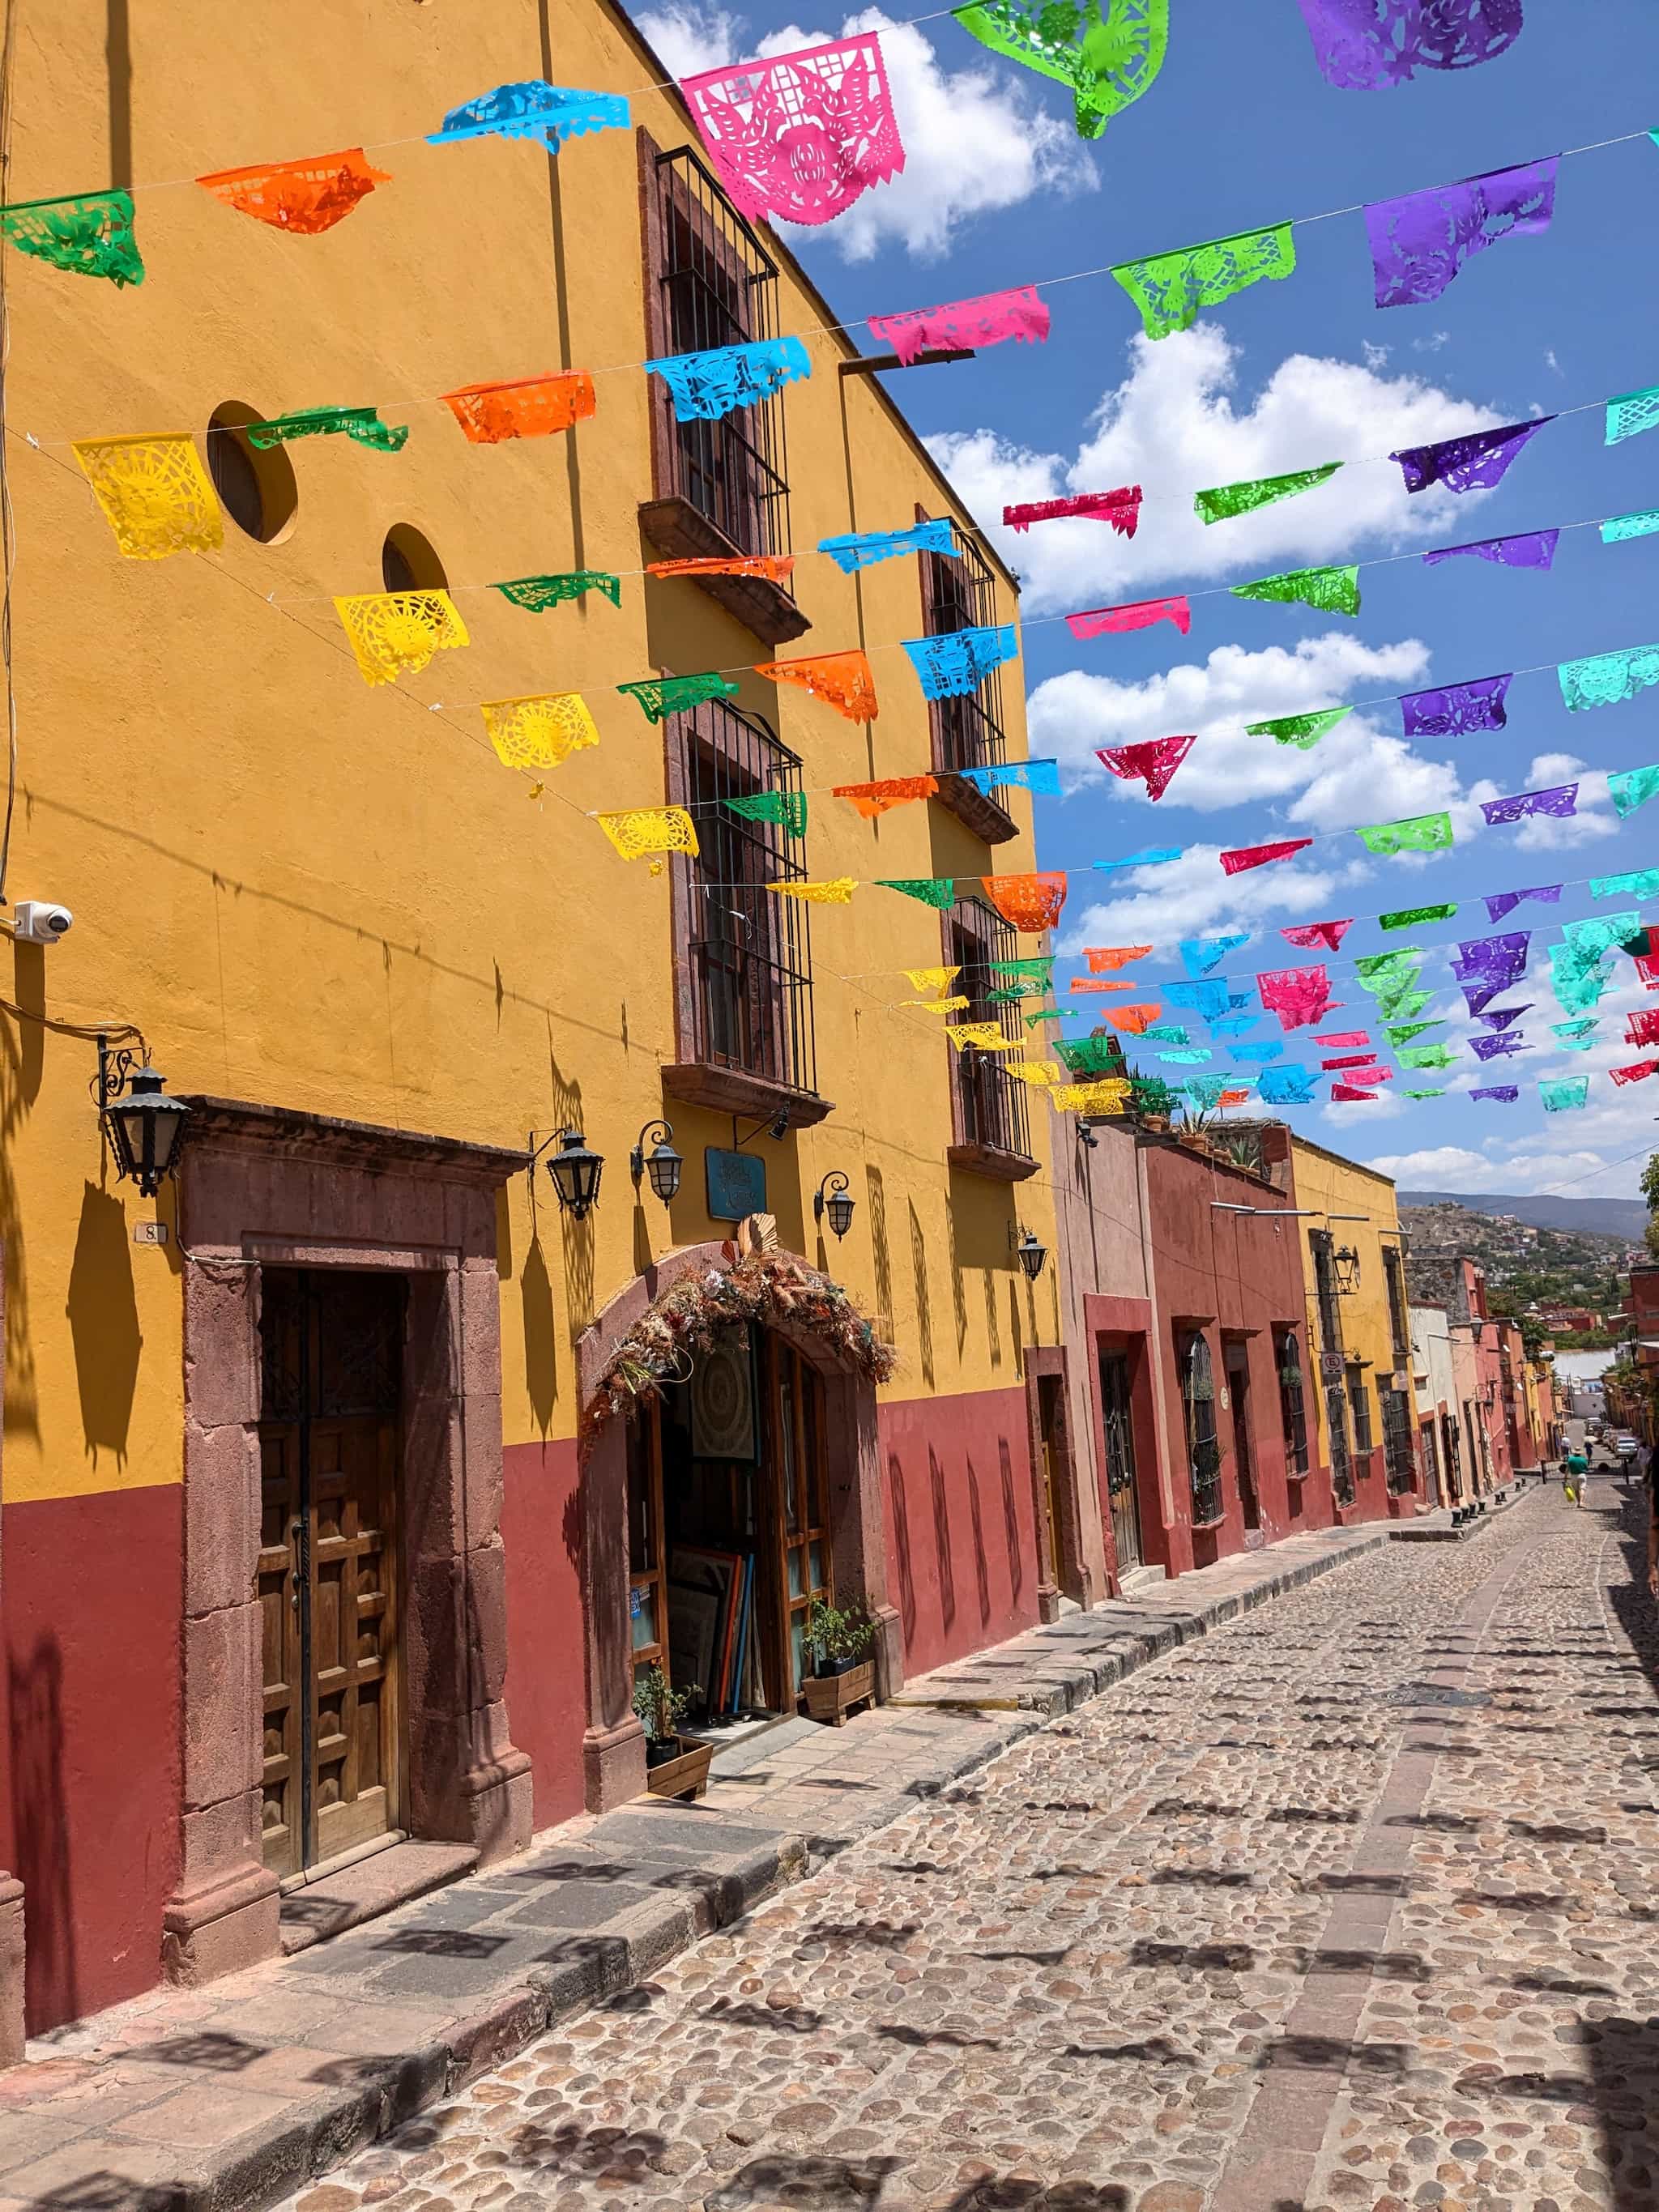 Cobblestone street with yellow buildings and colorful paper flags hanging above on a sunny day.